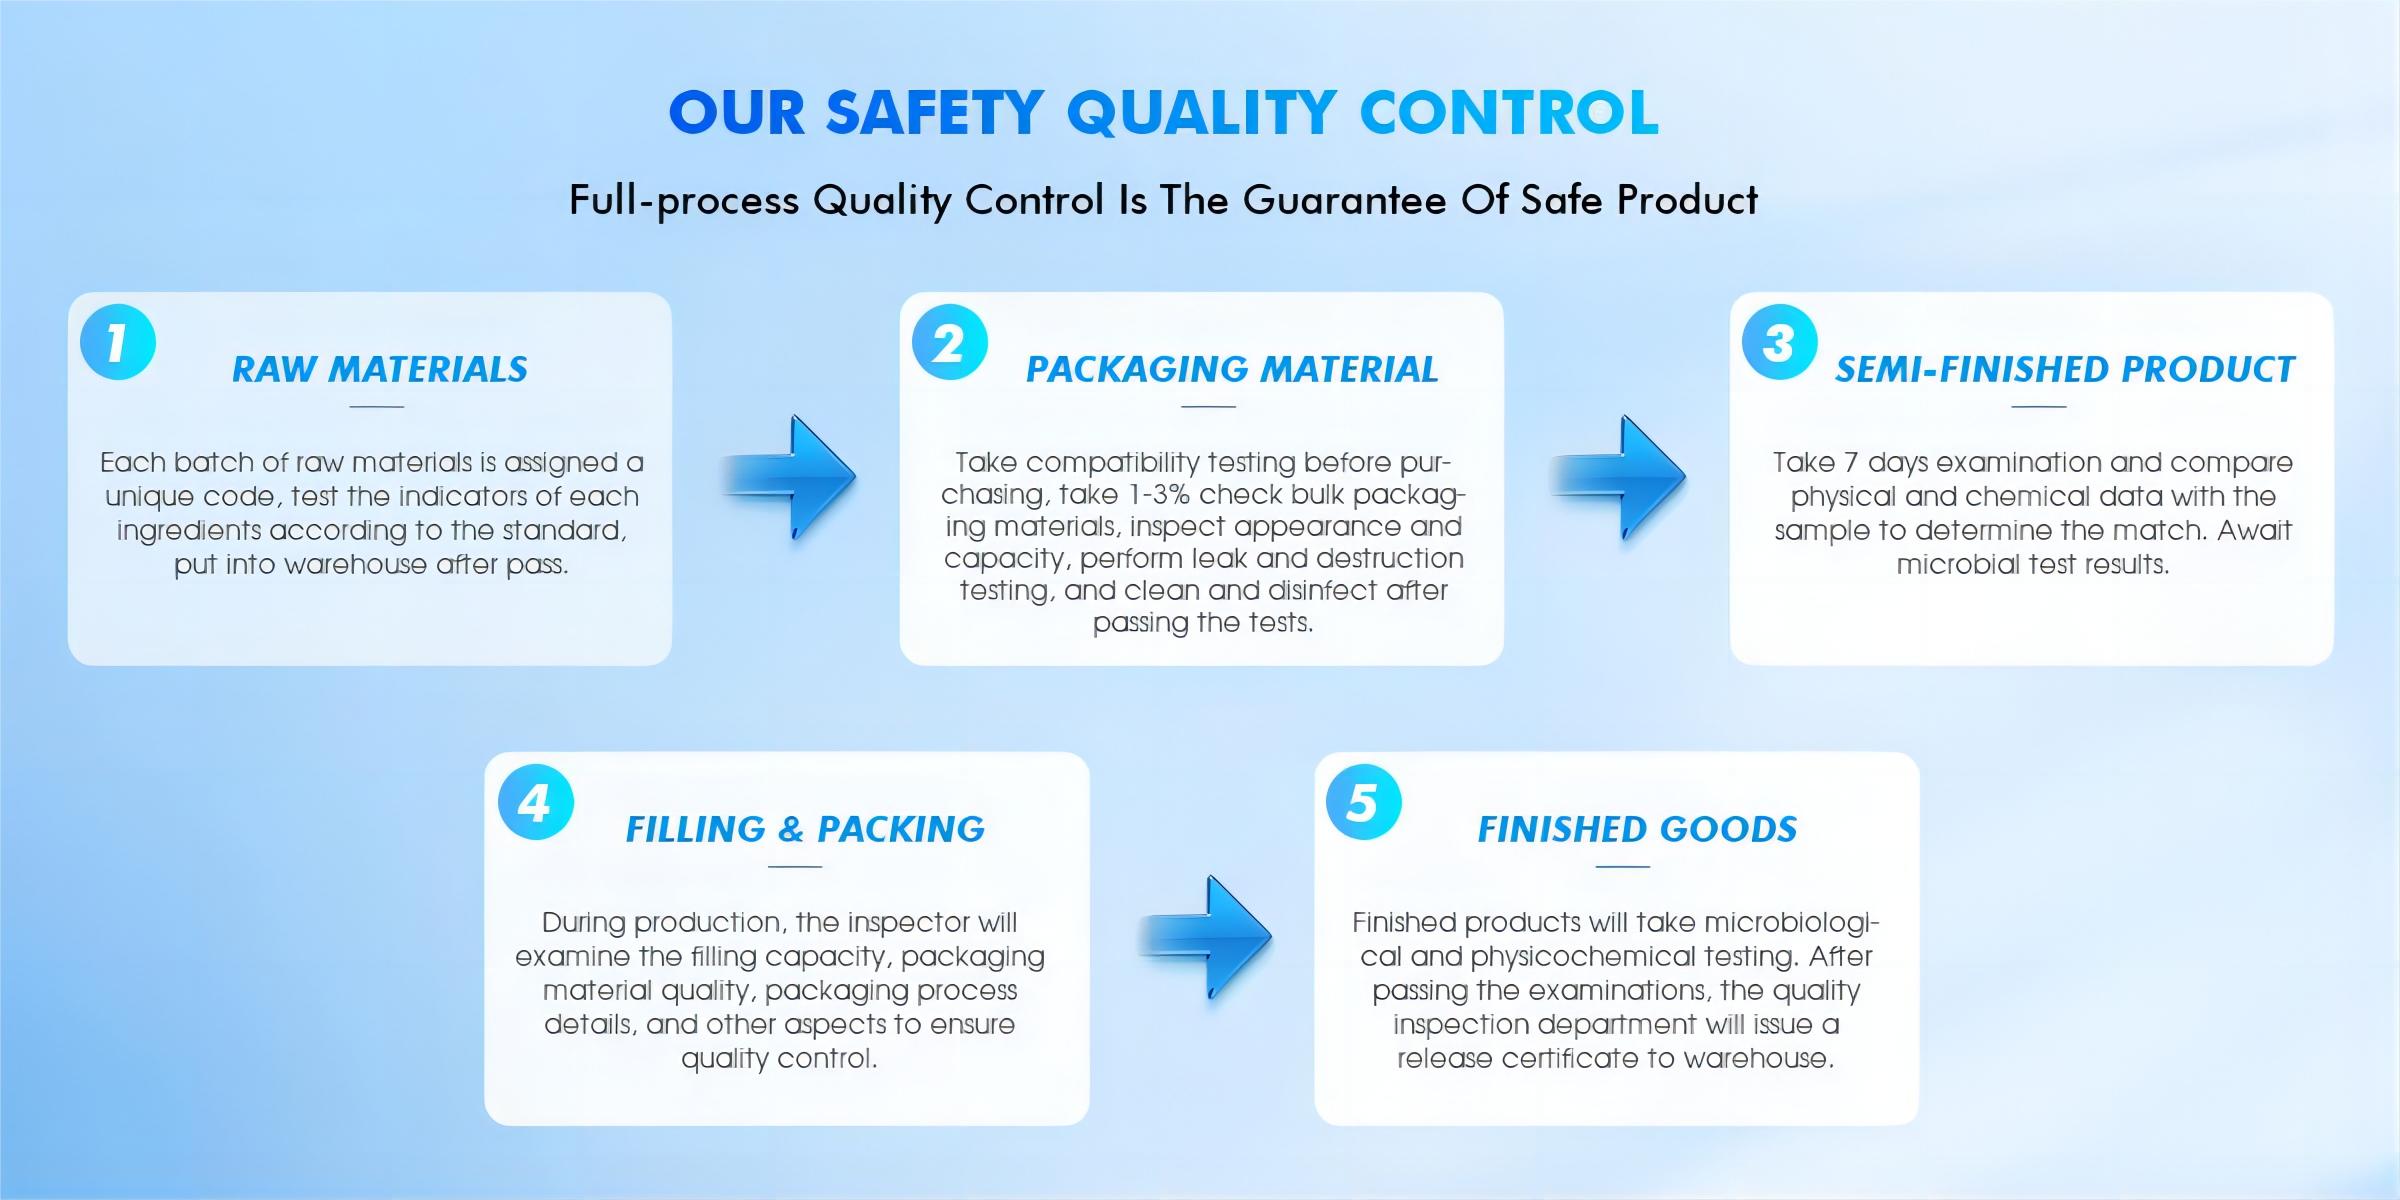 Our Safety Quality Controlter